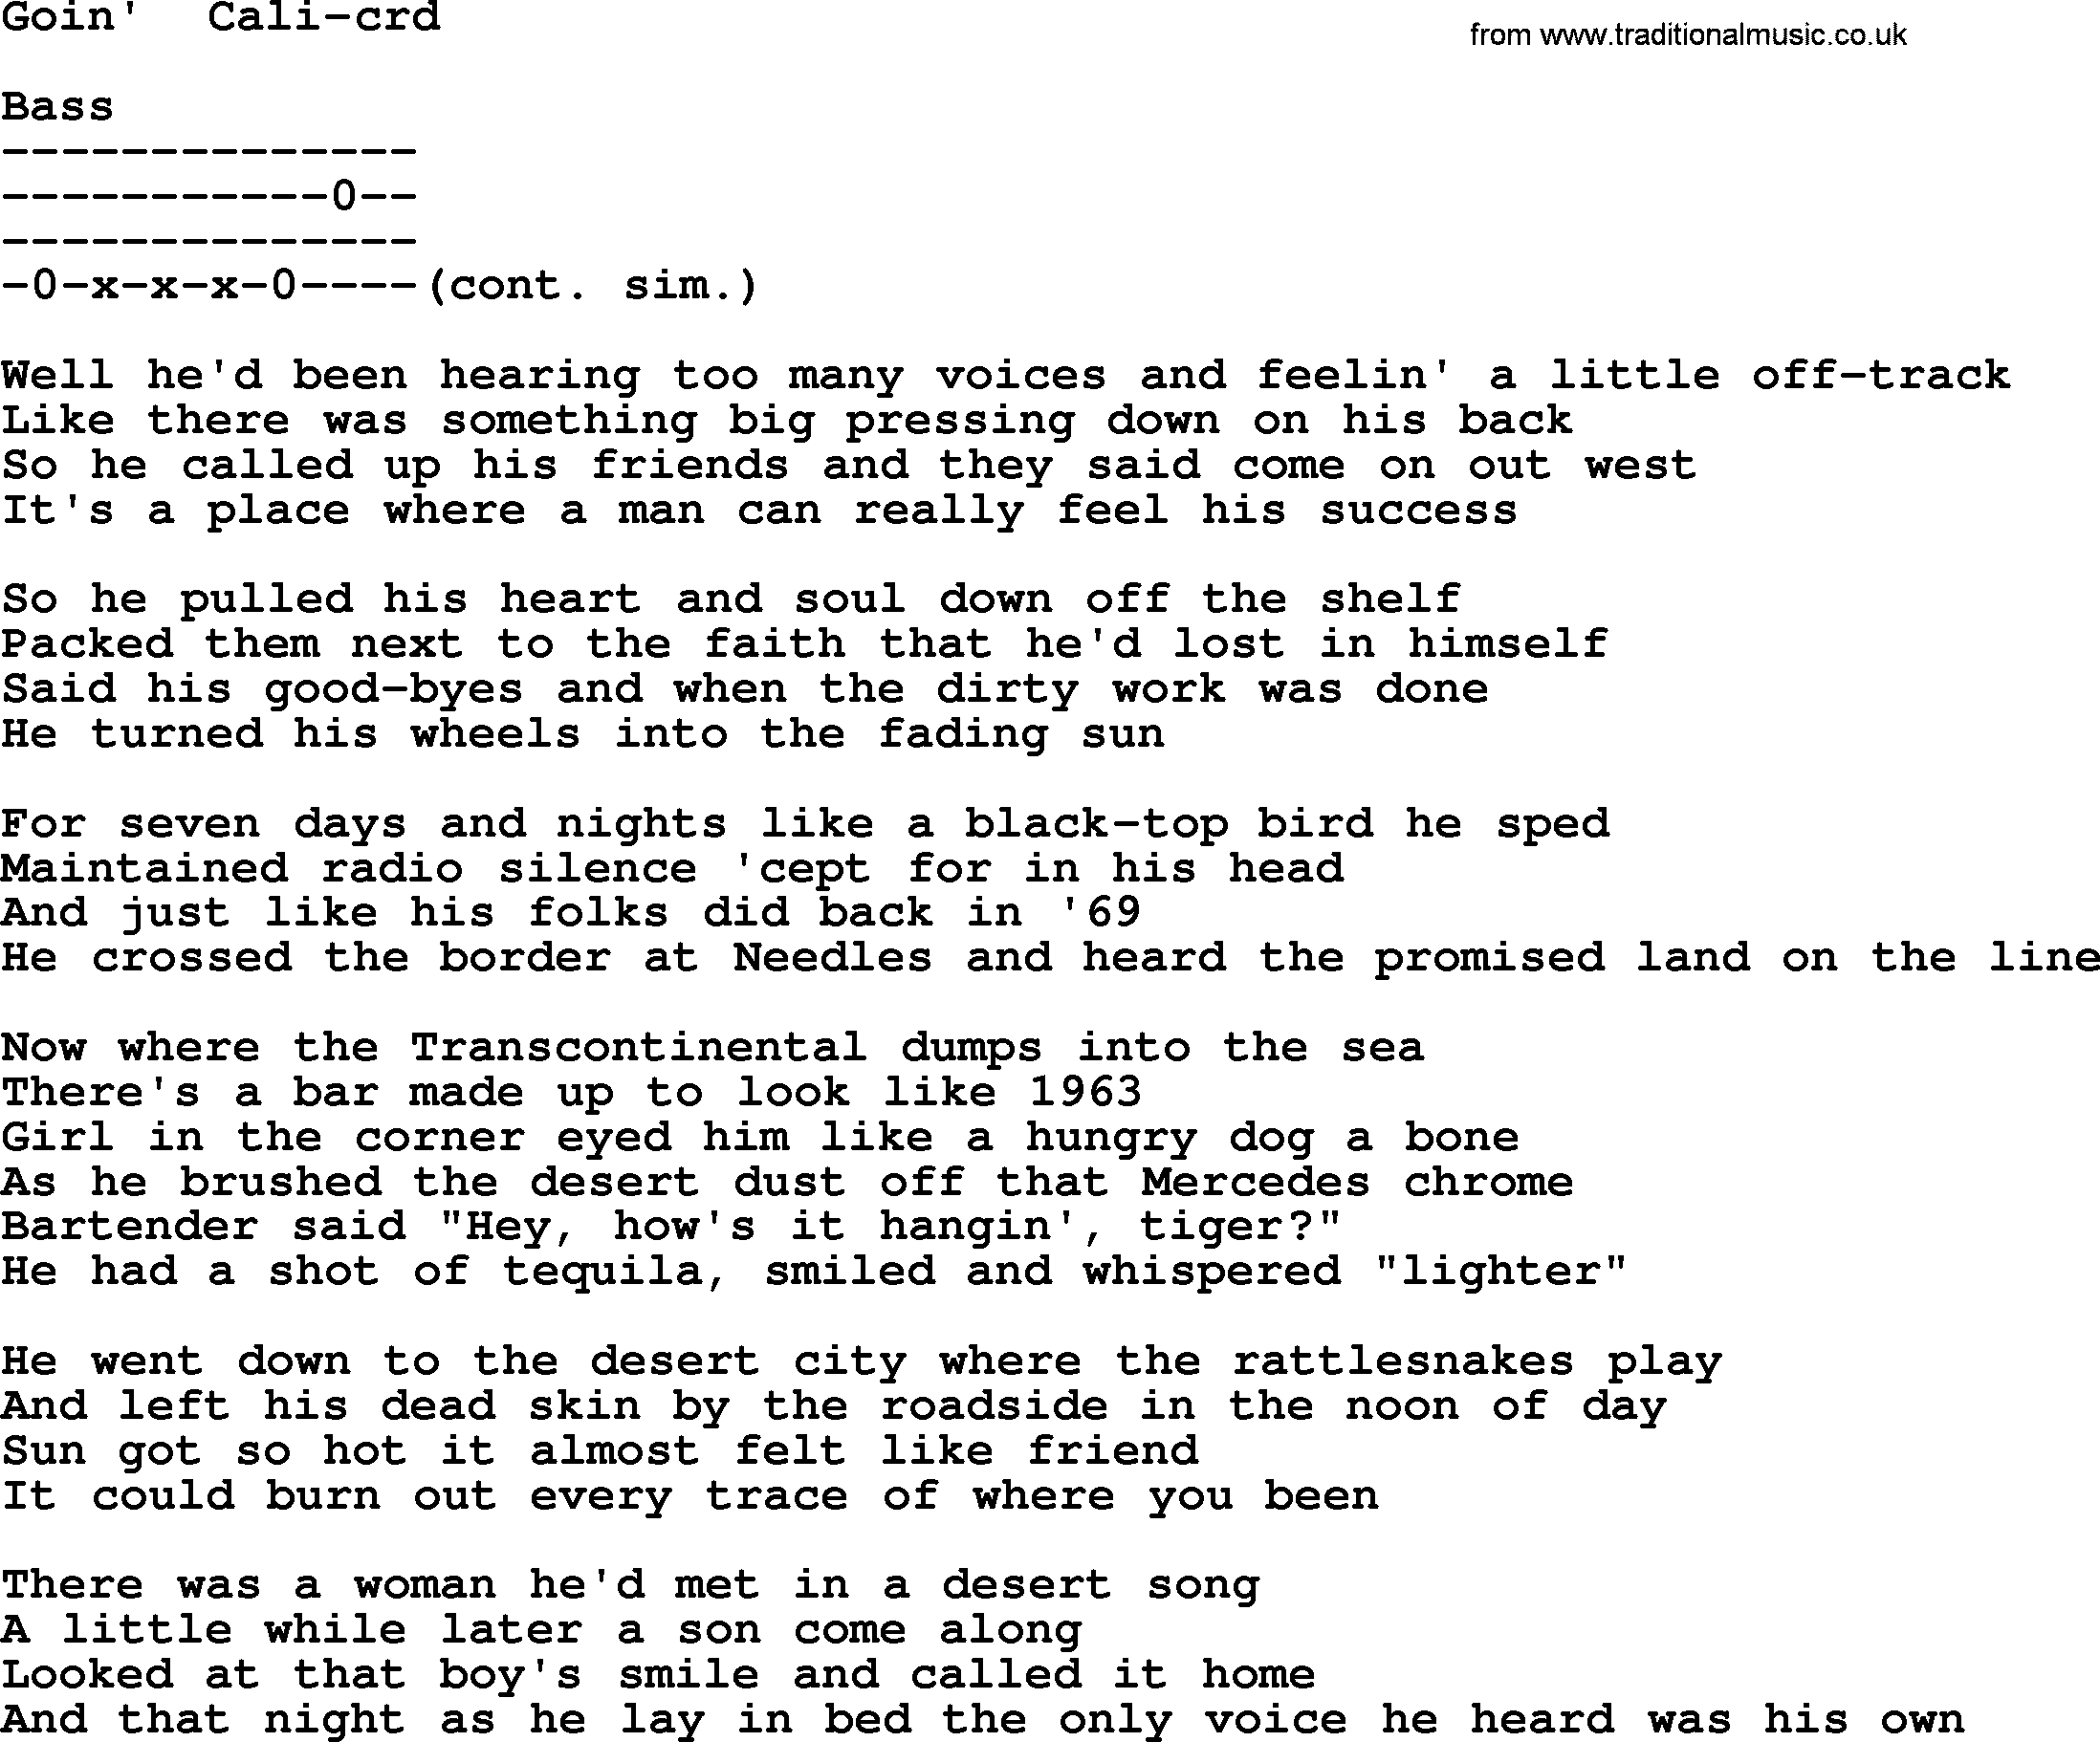 Bruce Springsteen song: Goin' Cali, lyrics and chords